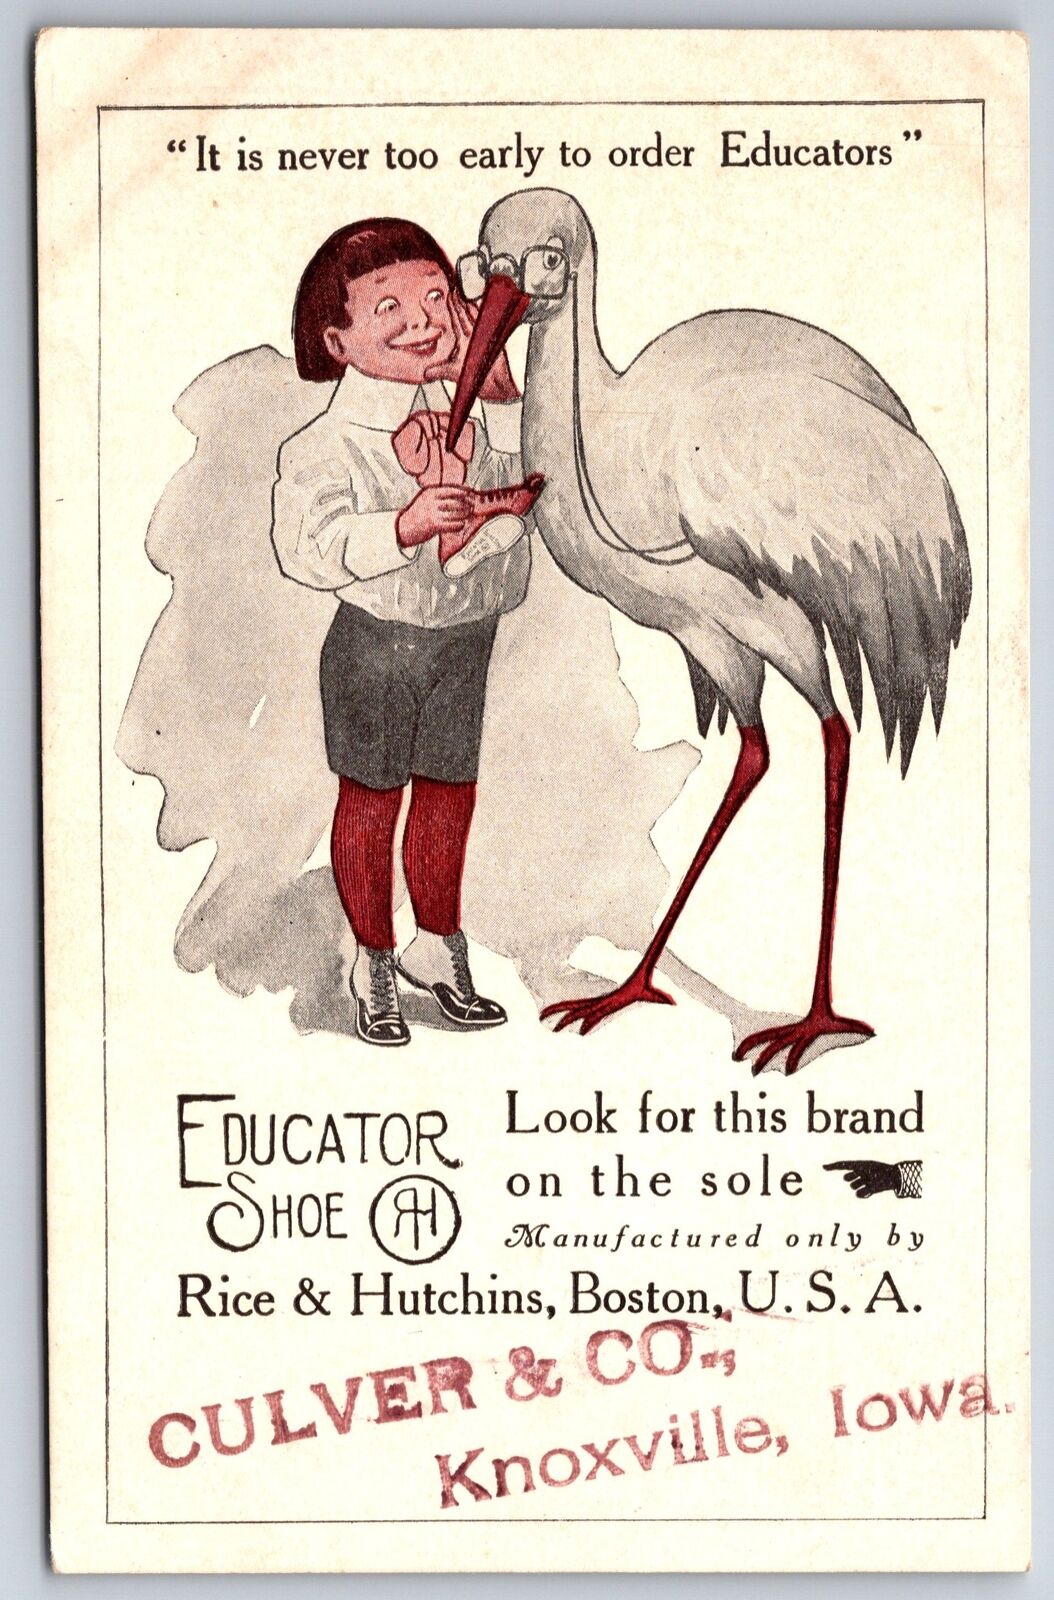 Knoxville Iowa~Culver & Co~Rice & Hutchins Boston~Educator Shoe Boy With Stork